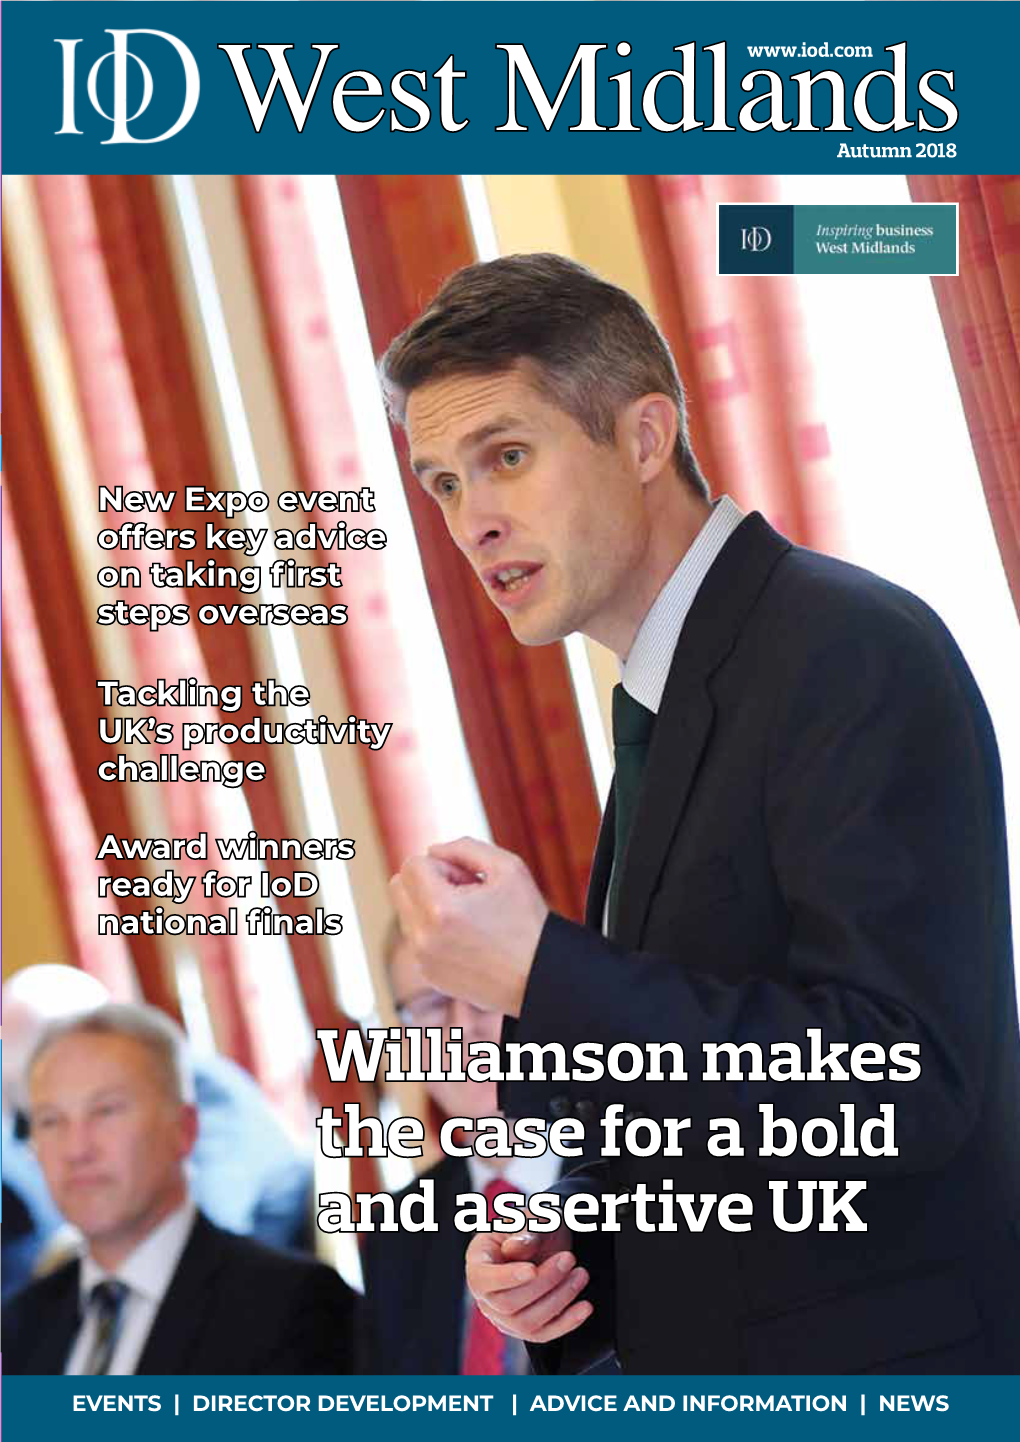 Williamson Makes the Case for a Bold and Assertive UK